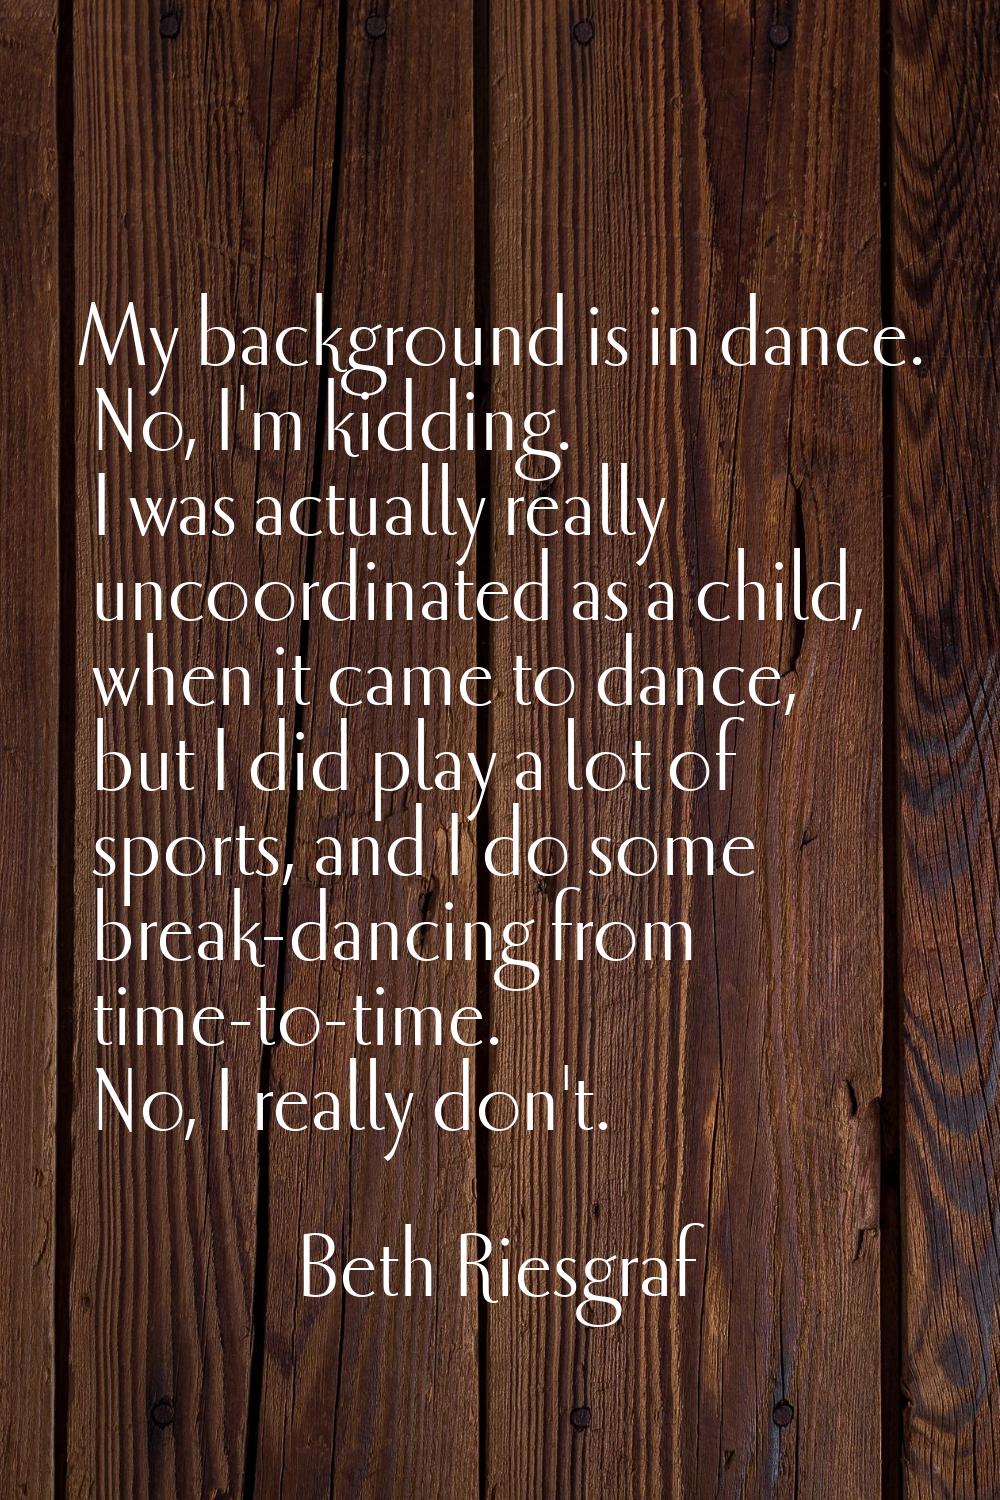 My background is in dance. No, I'm kidding. I was actually really uncoordinated as a child, when it